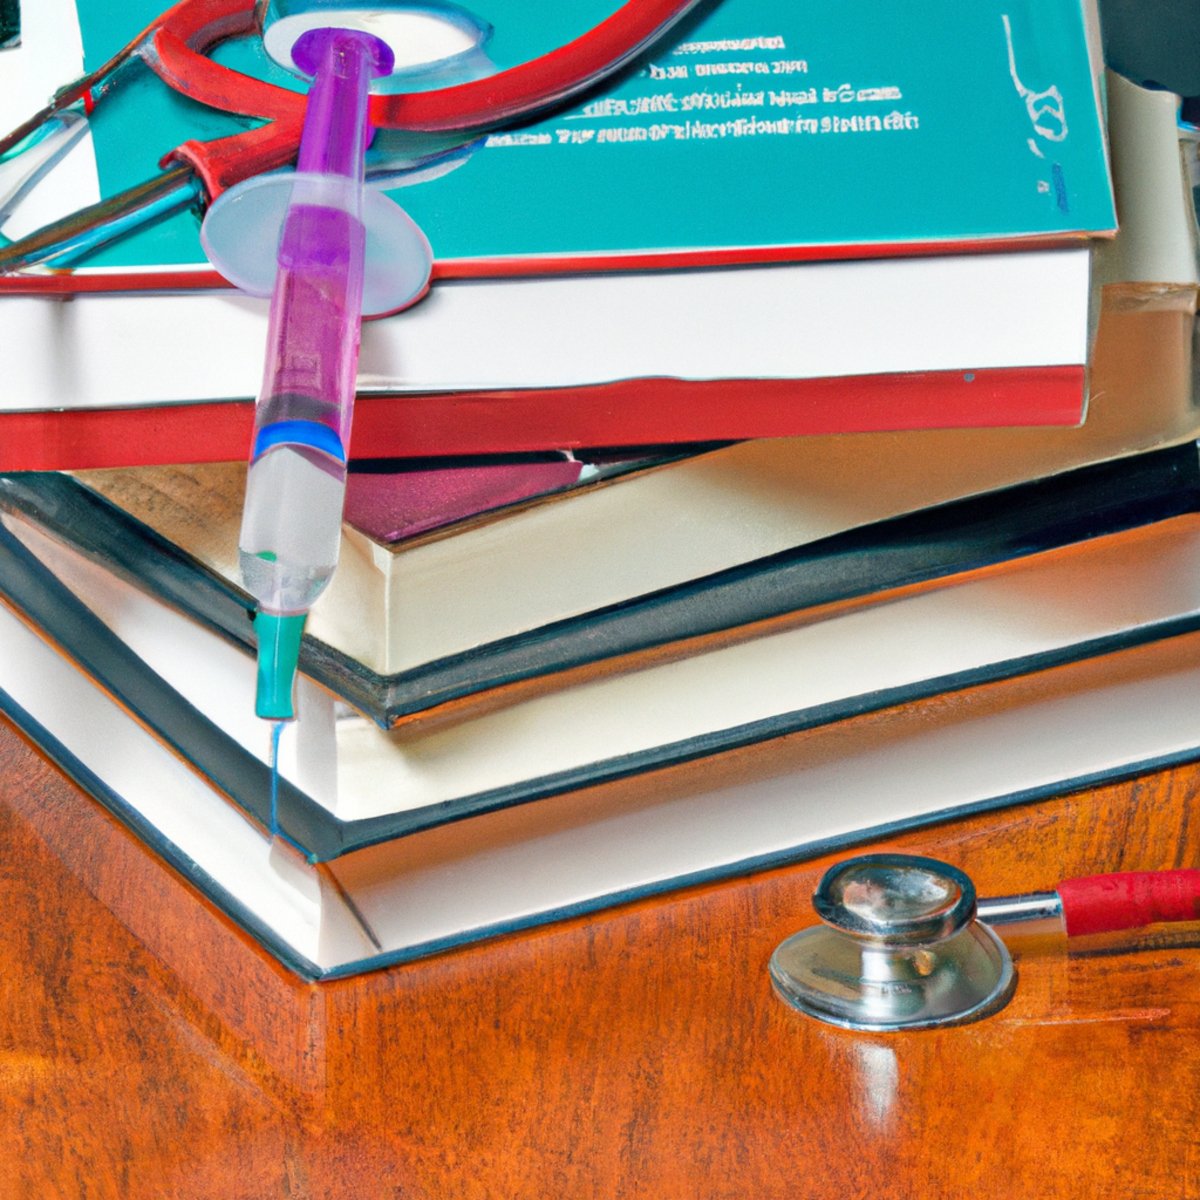 Medical tools and textbooks symbolize the importance of knowledge in understanding Kawasaki Disease, with medication and a heart model in the background.